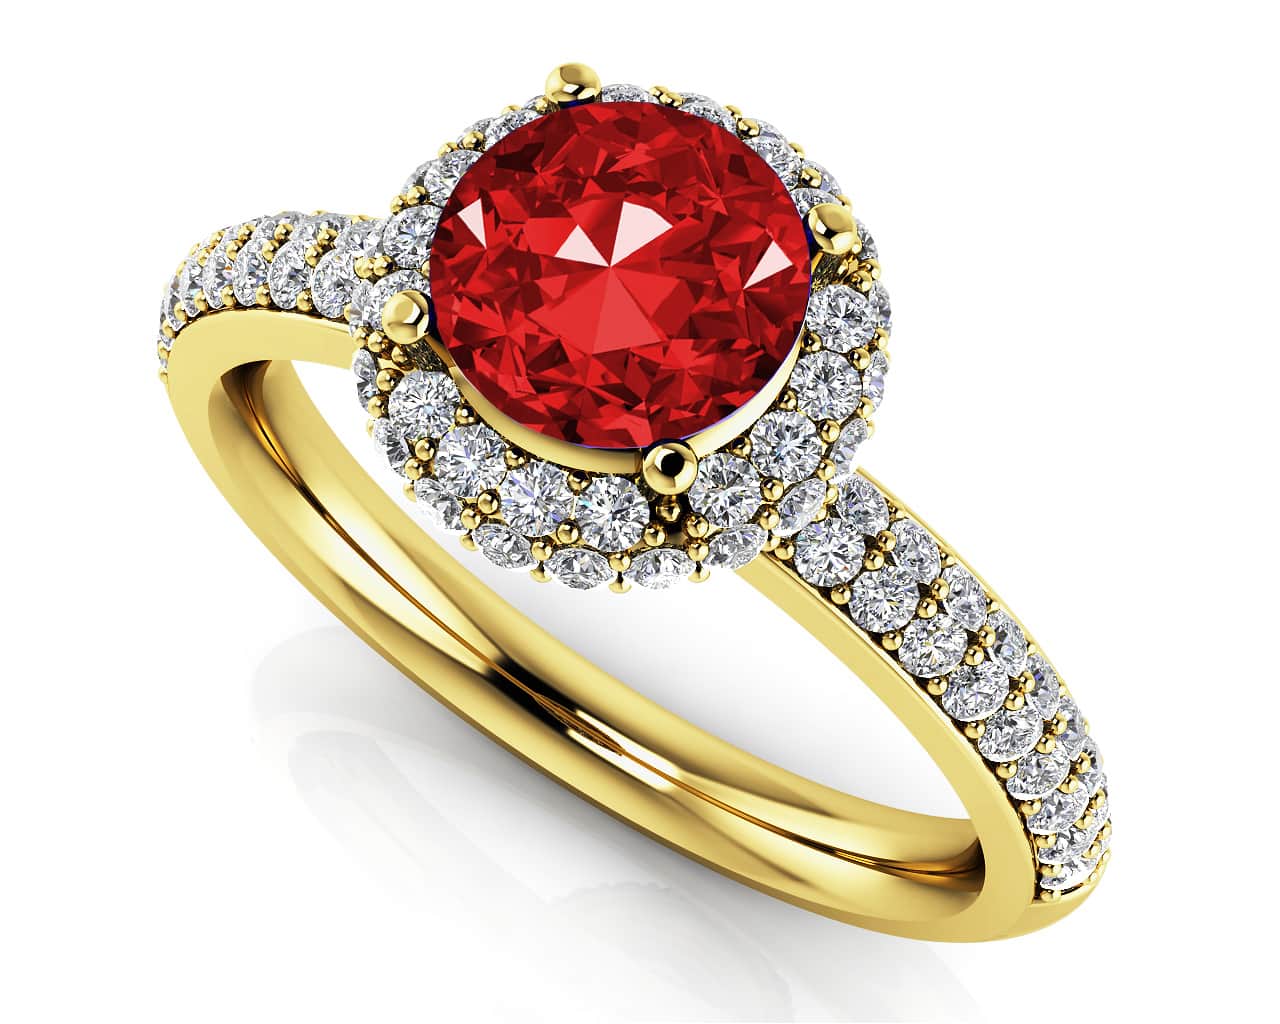 Gorgeous Gemstone With Double Halo Anniversary Ring Available In Gold Or Platinum